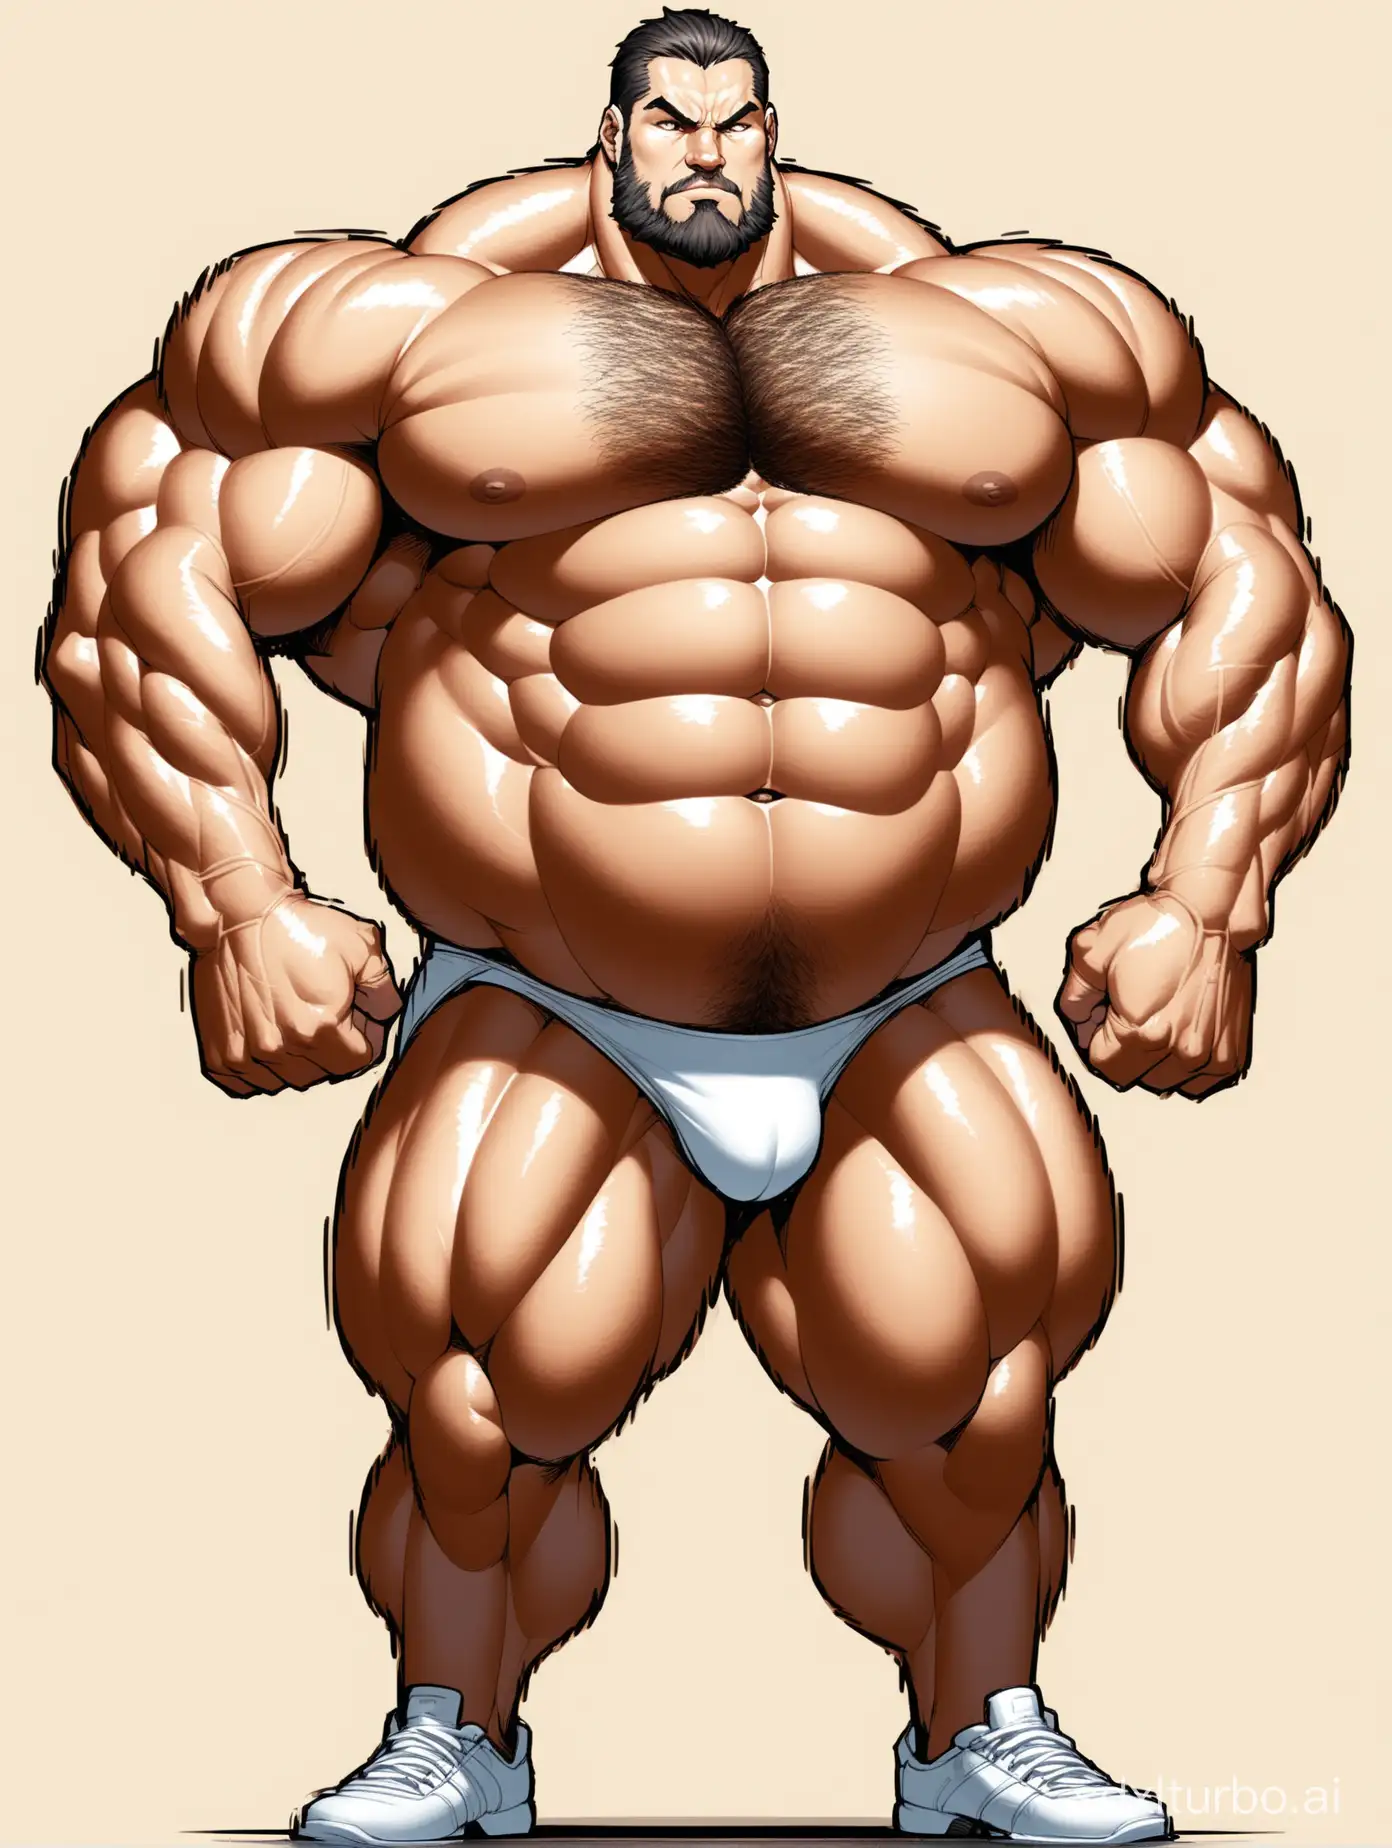 White skin and massive muscle stud, much bodyhair. Huge and giant and Strong body. Very Long and strong legs. 2m tall. very Big Chest. very Big biceps. 8-pack abs. Very Massive muscle Body. Wearing underwear. he is giant tall. very fat. very fat. very fat. Full Body diagram. very long strong legs.very long legs.very long legs. raise his arms to show his huge biceps. wearing white shoes. raise his arms to show his huge biceps.very old man.very old men.